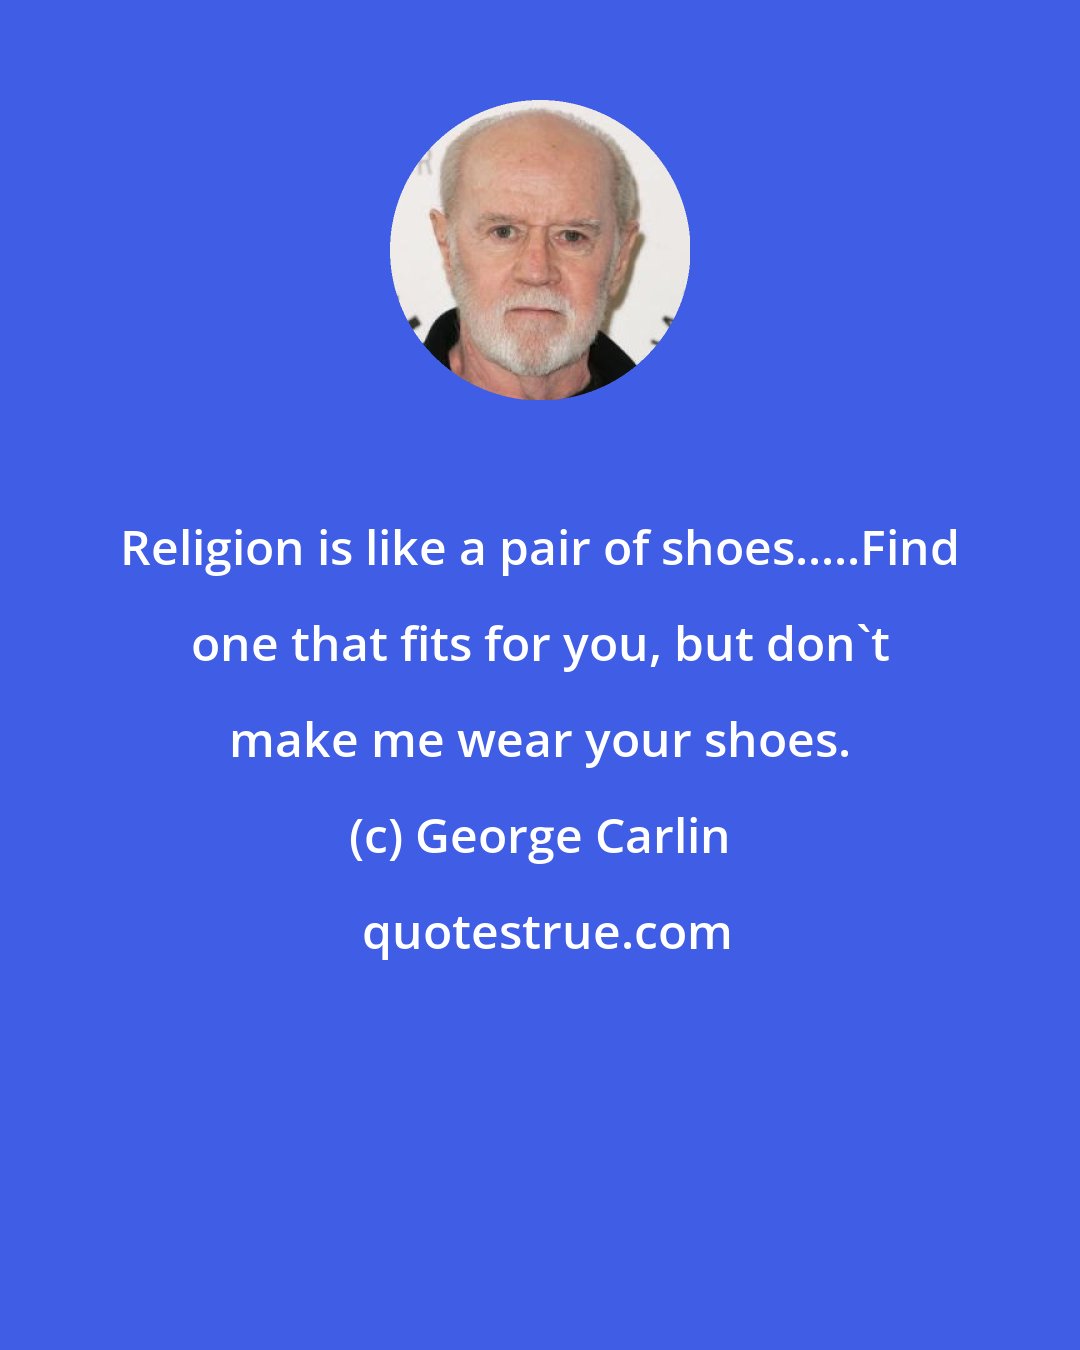 George Carlin: Religion is like a pair of shoes.....Find one that fits for you, but don't make me wear your shoes.